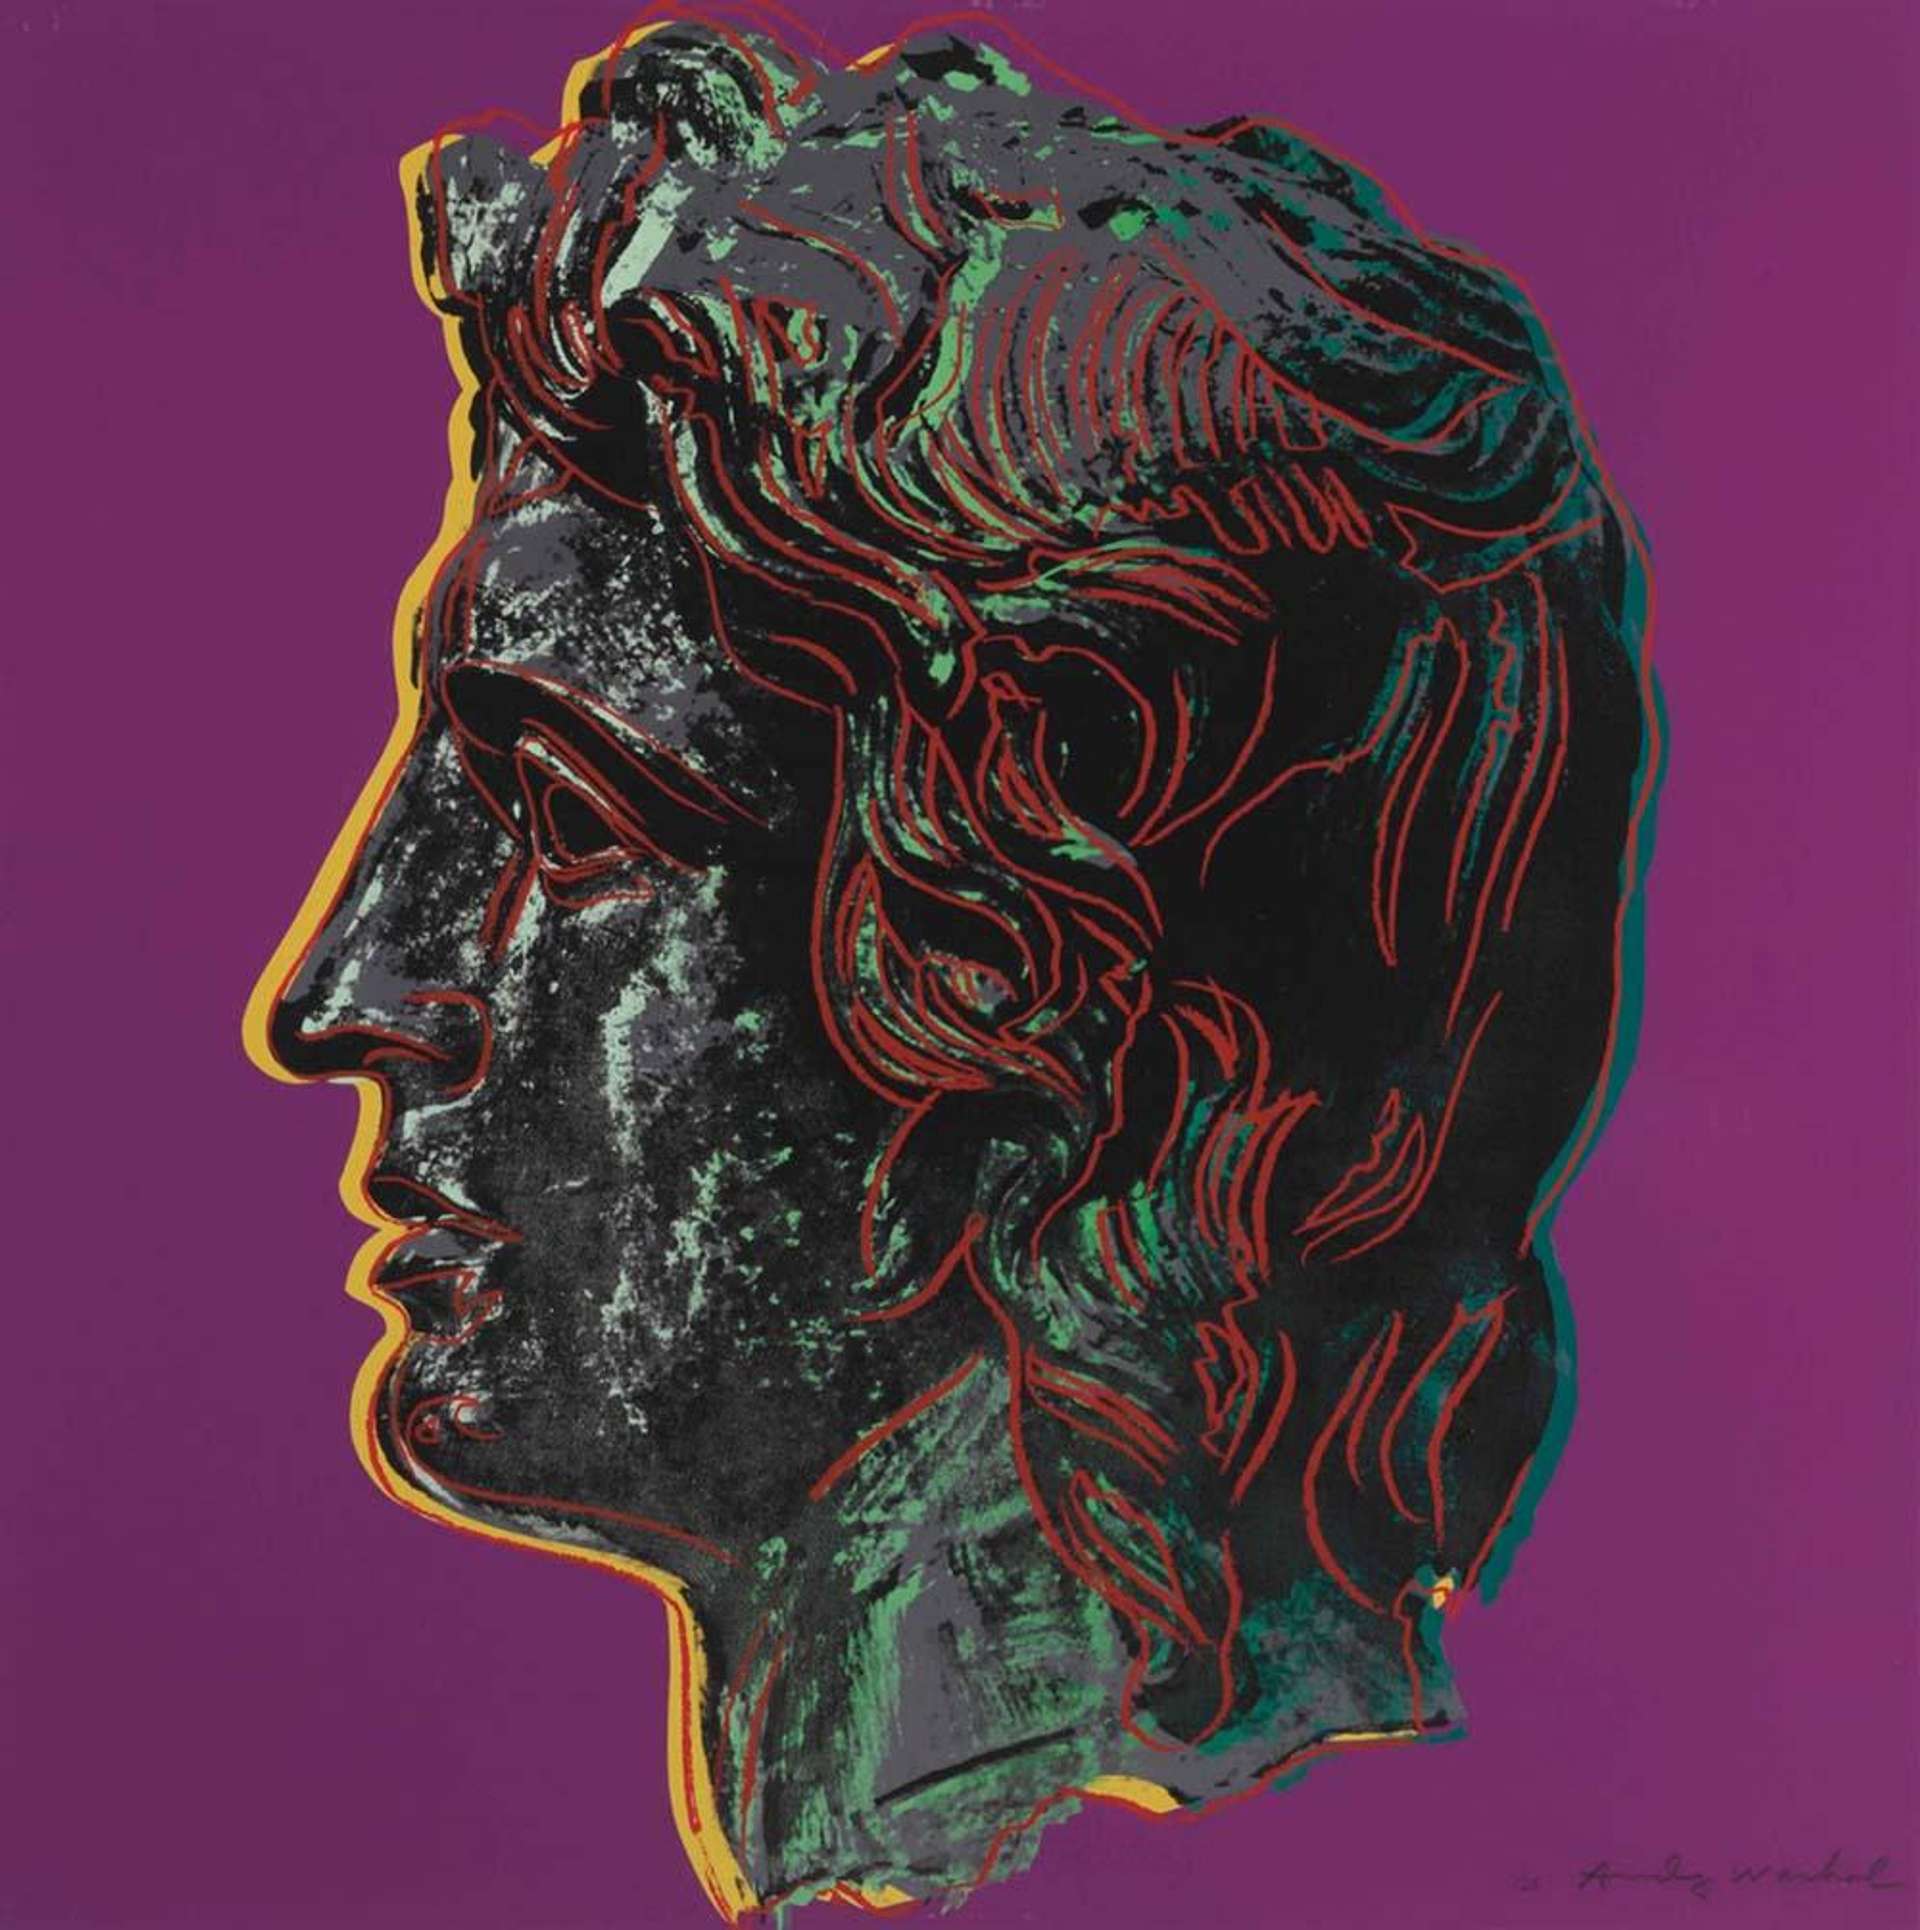 Alexander The Great (F. & S. II.291) by Andy Warhol